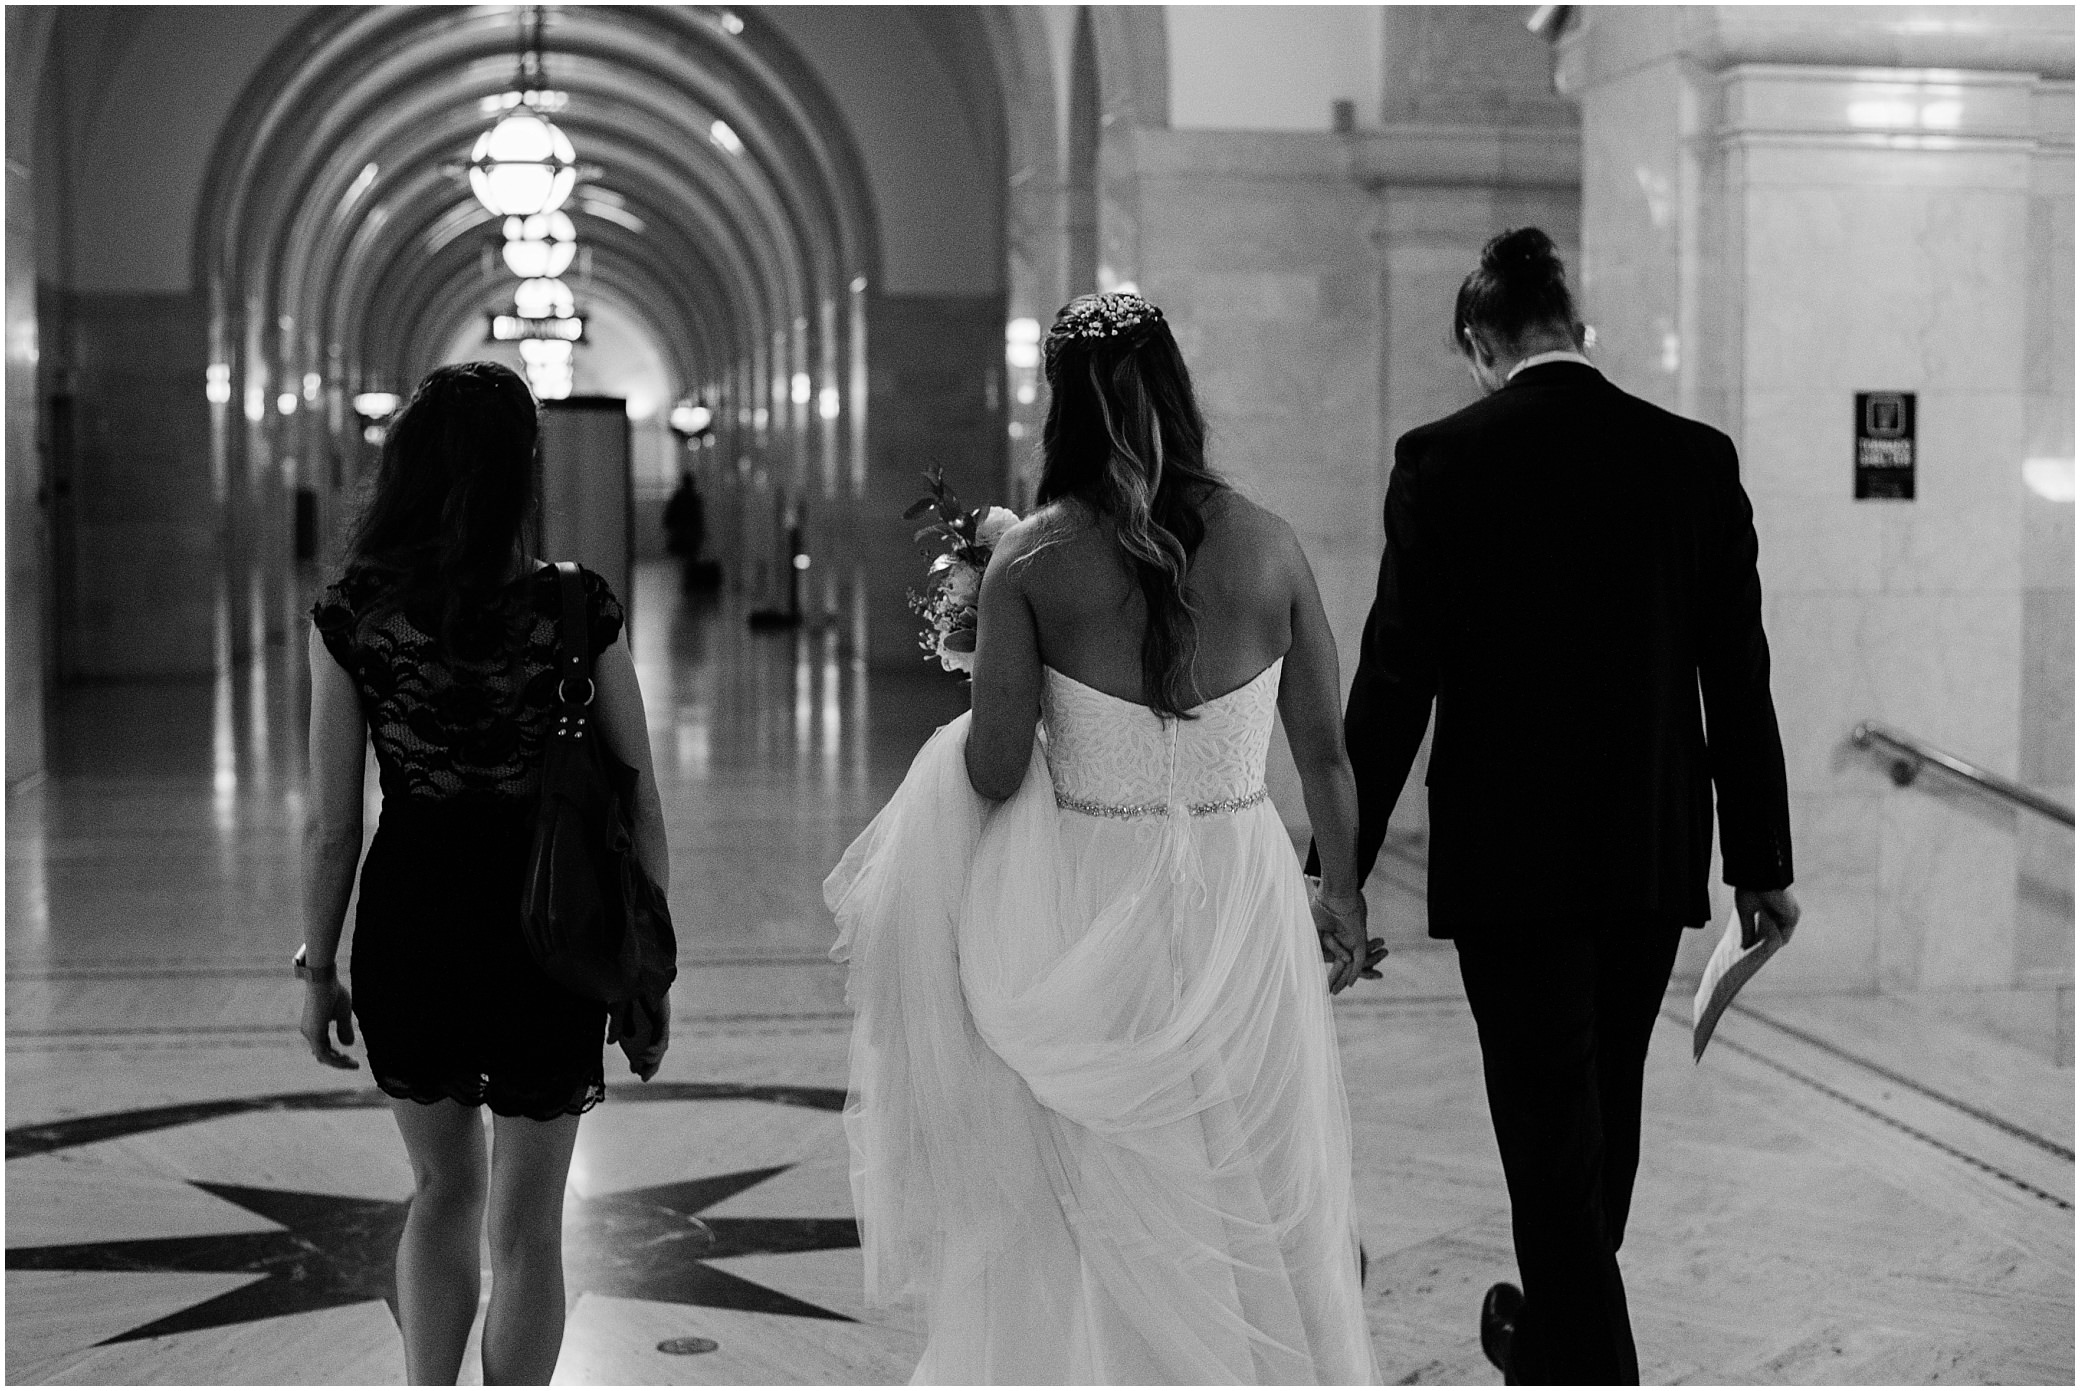 Courthouse weddings are the best! A newly married couple walks down the hall in the Milwaukee courthouse, holding hands.